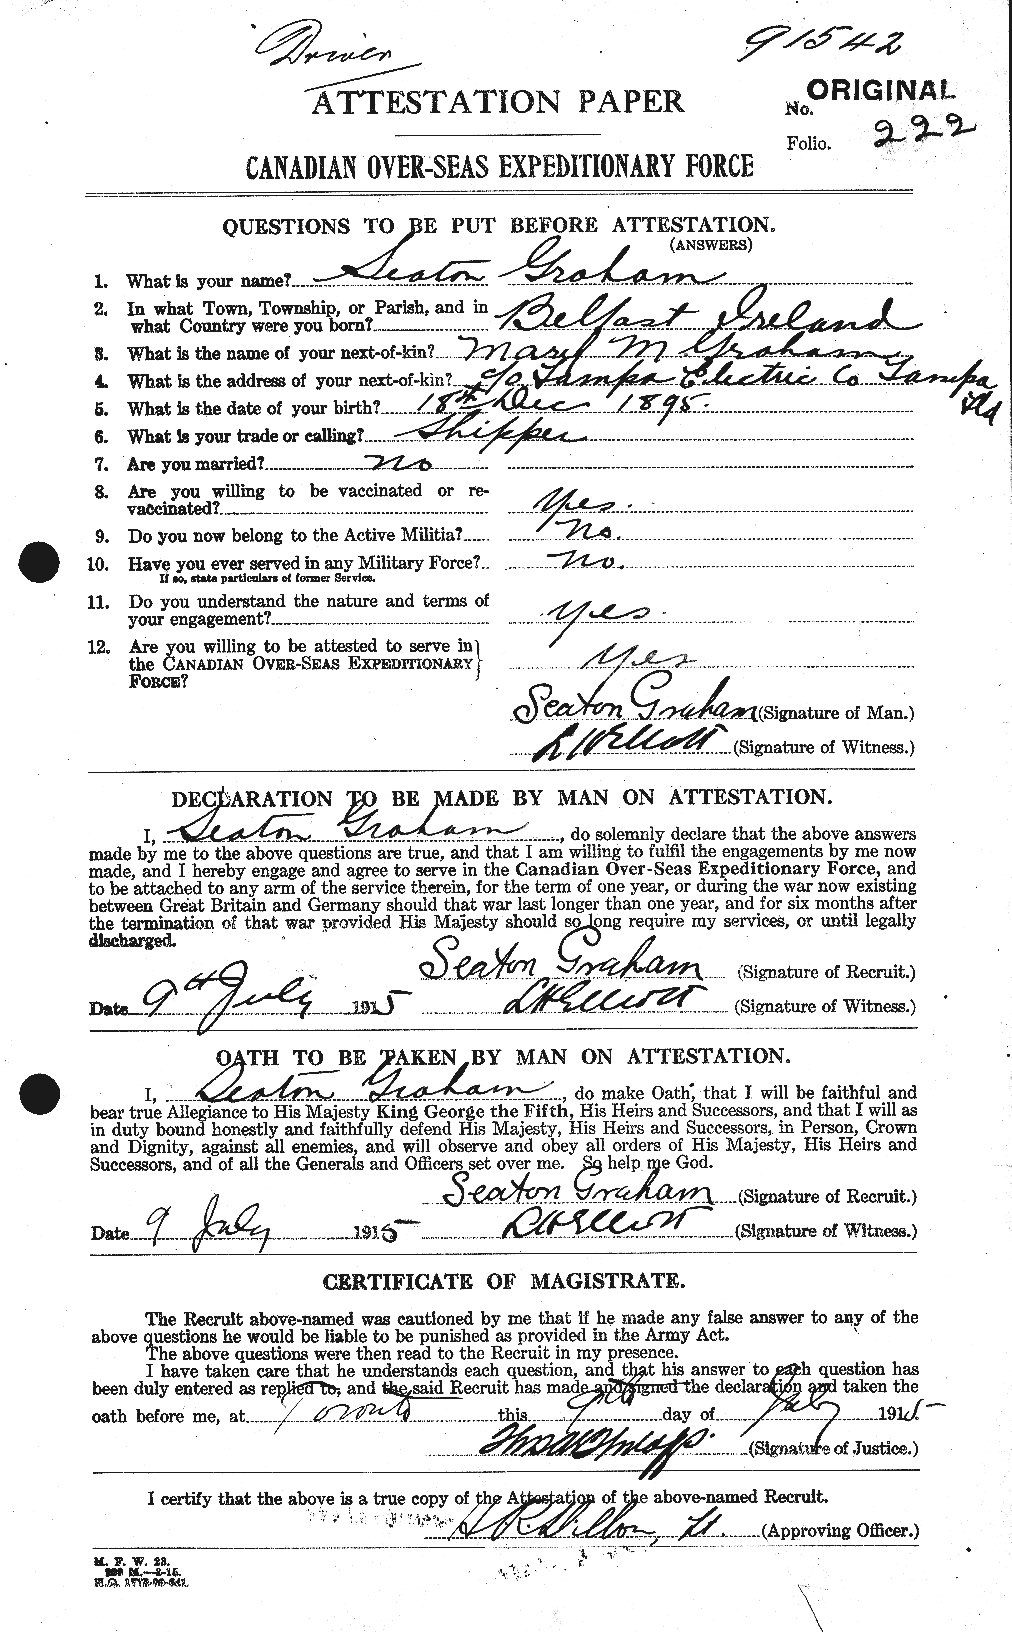 Personnel Records of the First World War - CEF 359461a